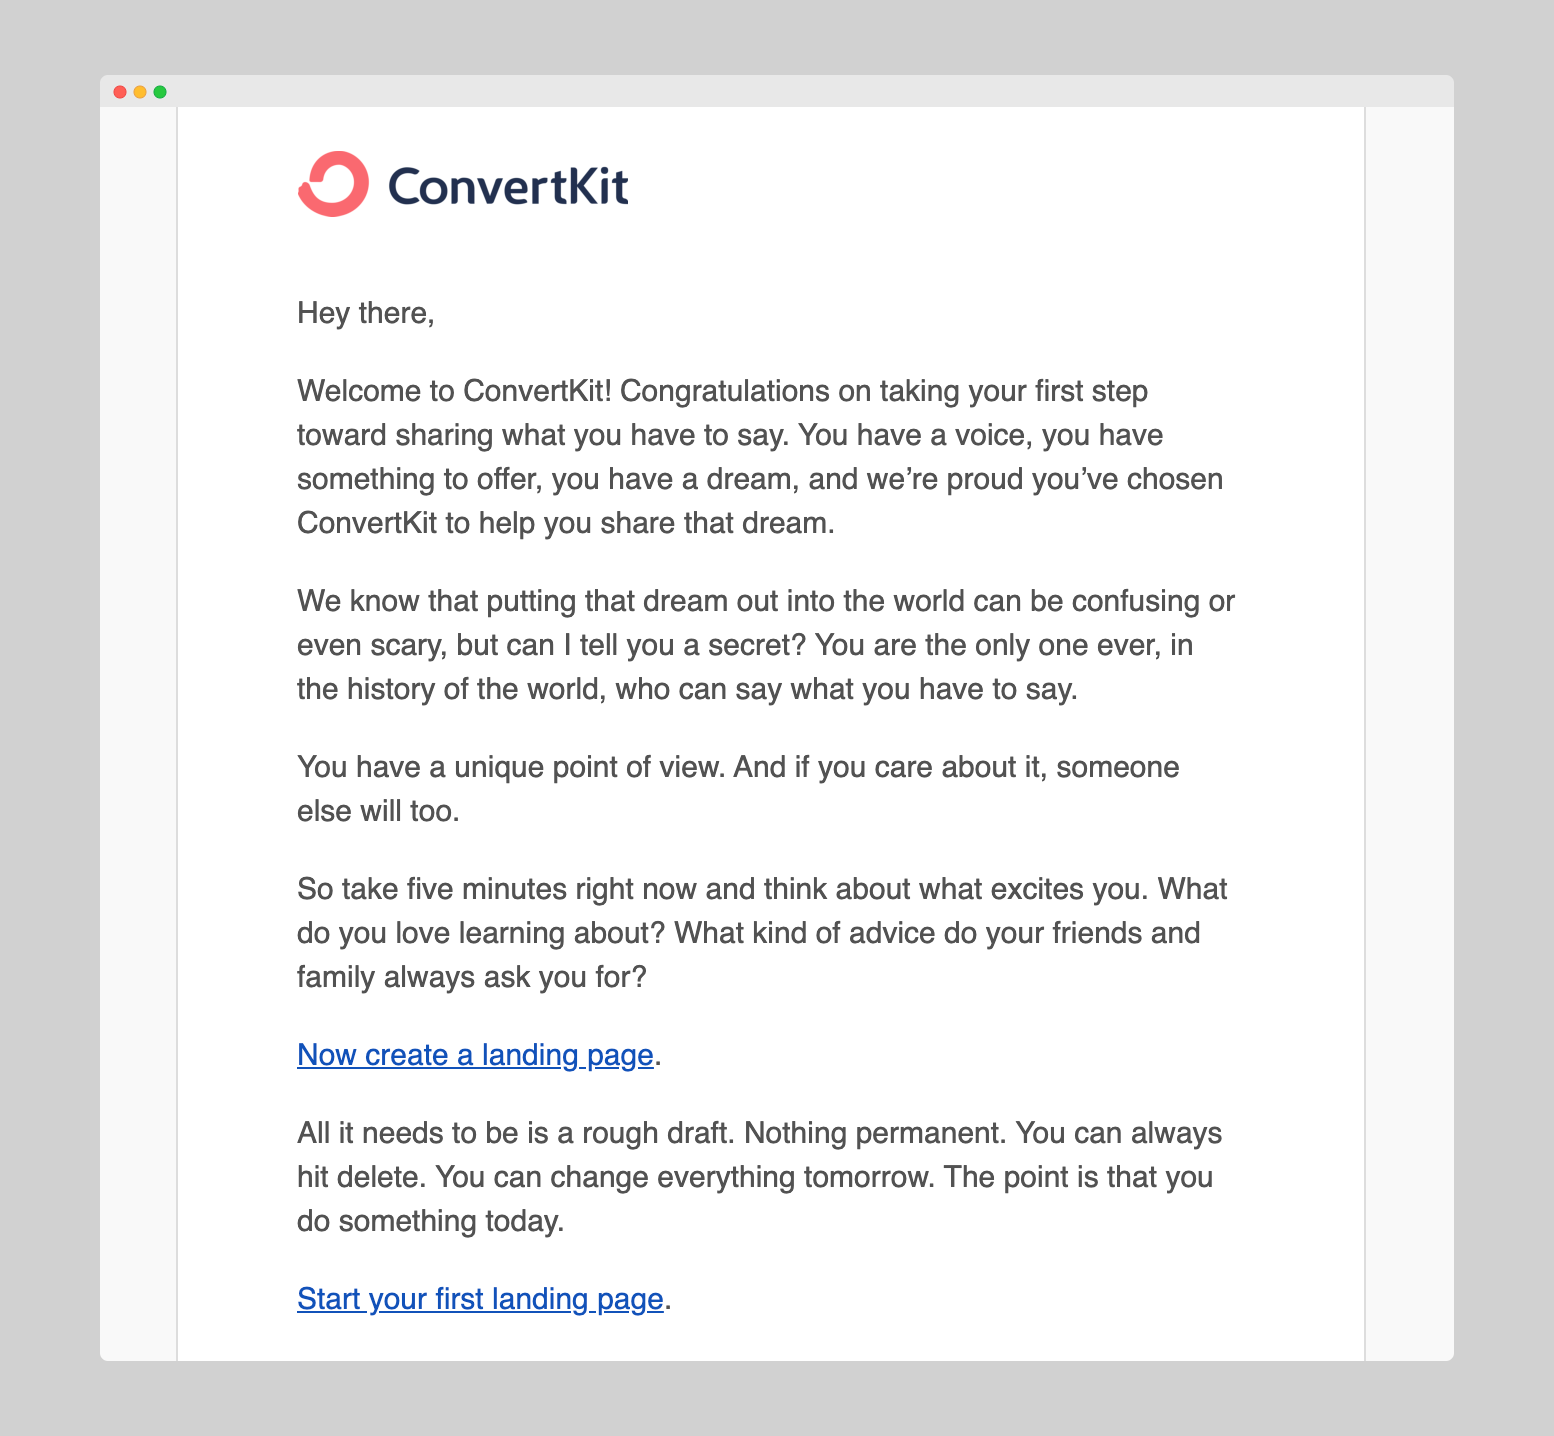 Email marketing strategy: ConvertKit's onboarding email